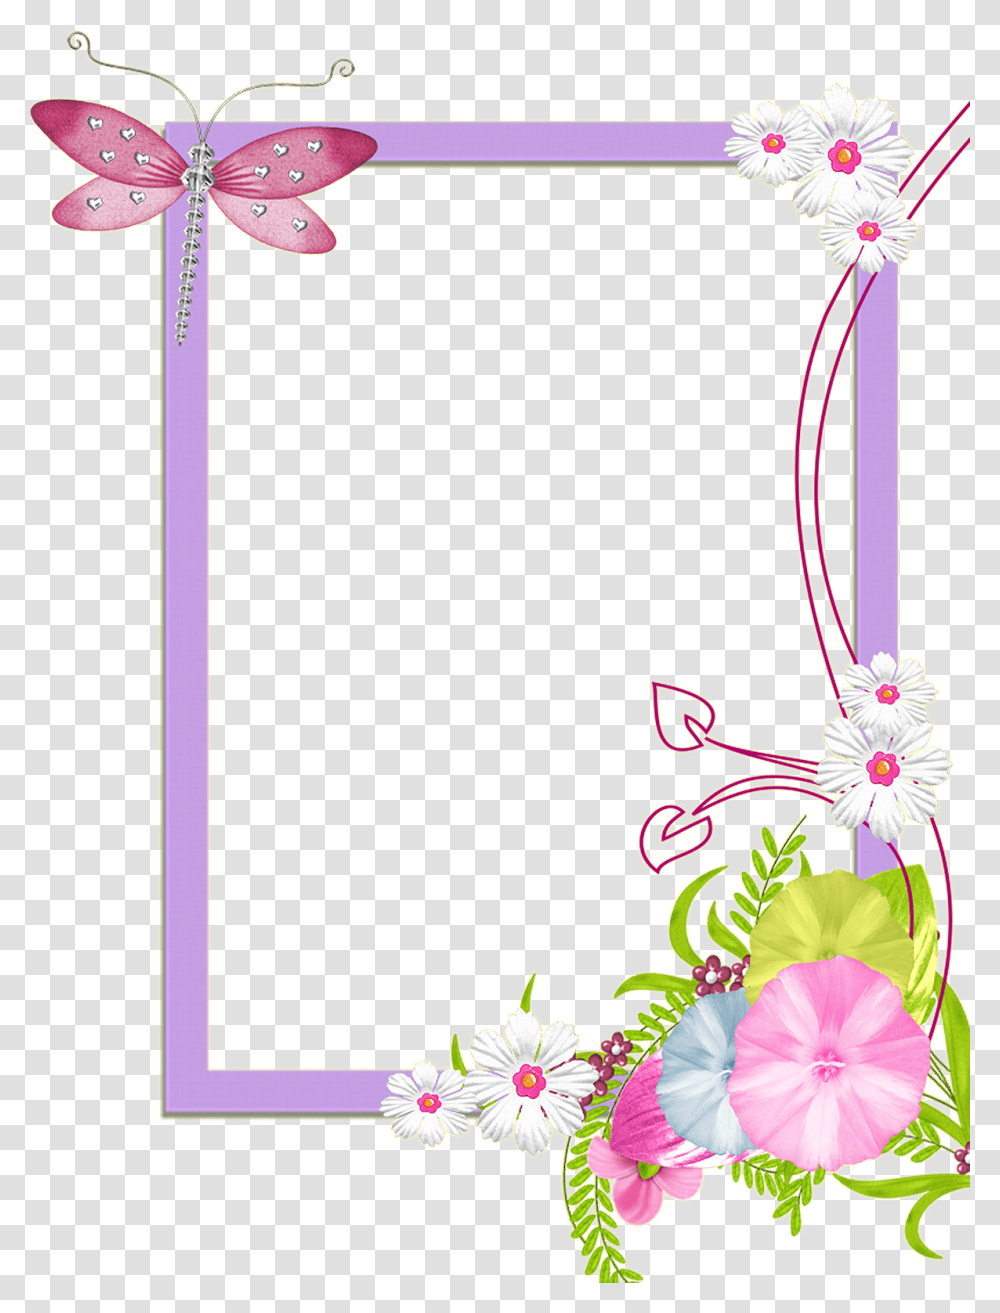 Frame Design Pin By Cantik Manis On And Frame Cute Cute Flower Frame, Graphics, Art, Floral Design, Pattern Transparent Png